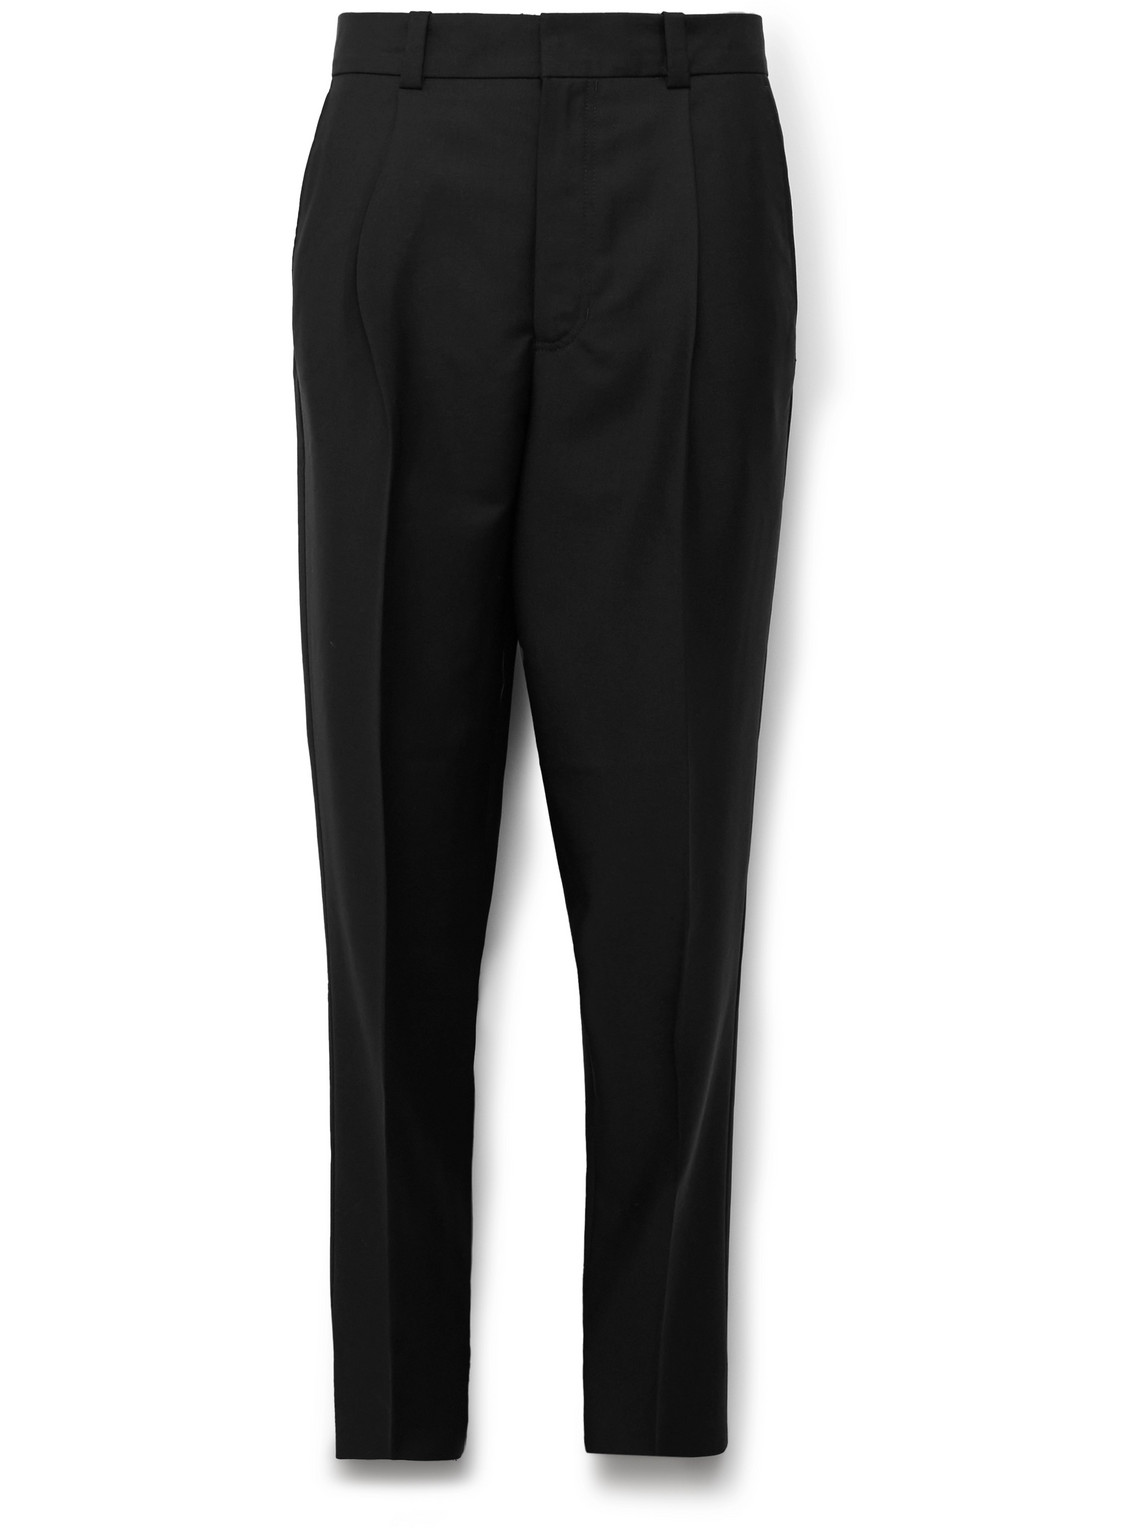 Acne Studios Porter Slim-Fit Pleated Wool and Mohair-Blend Trousers